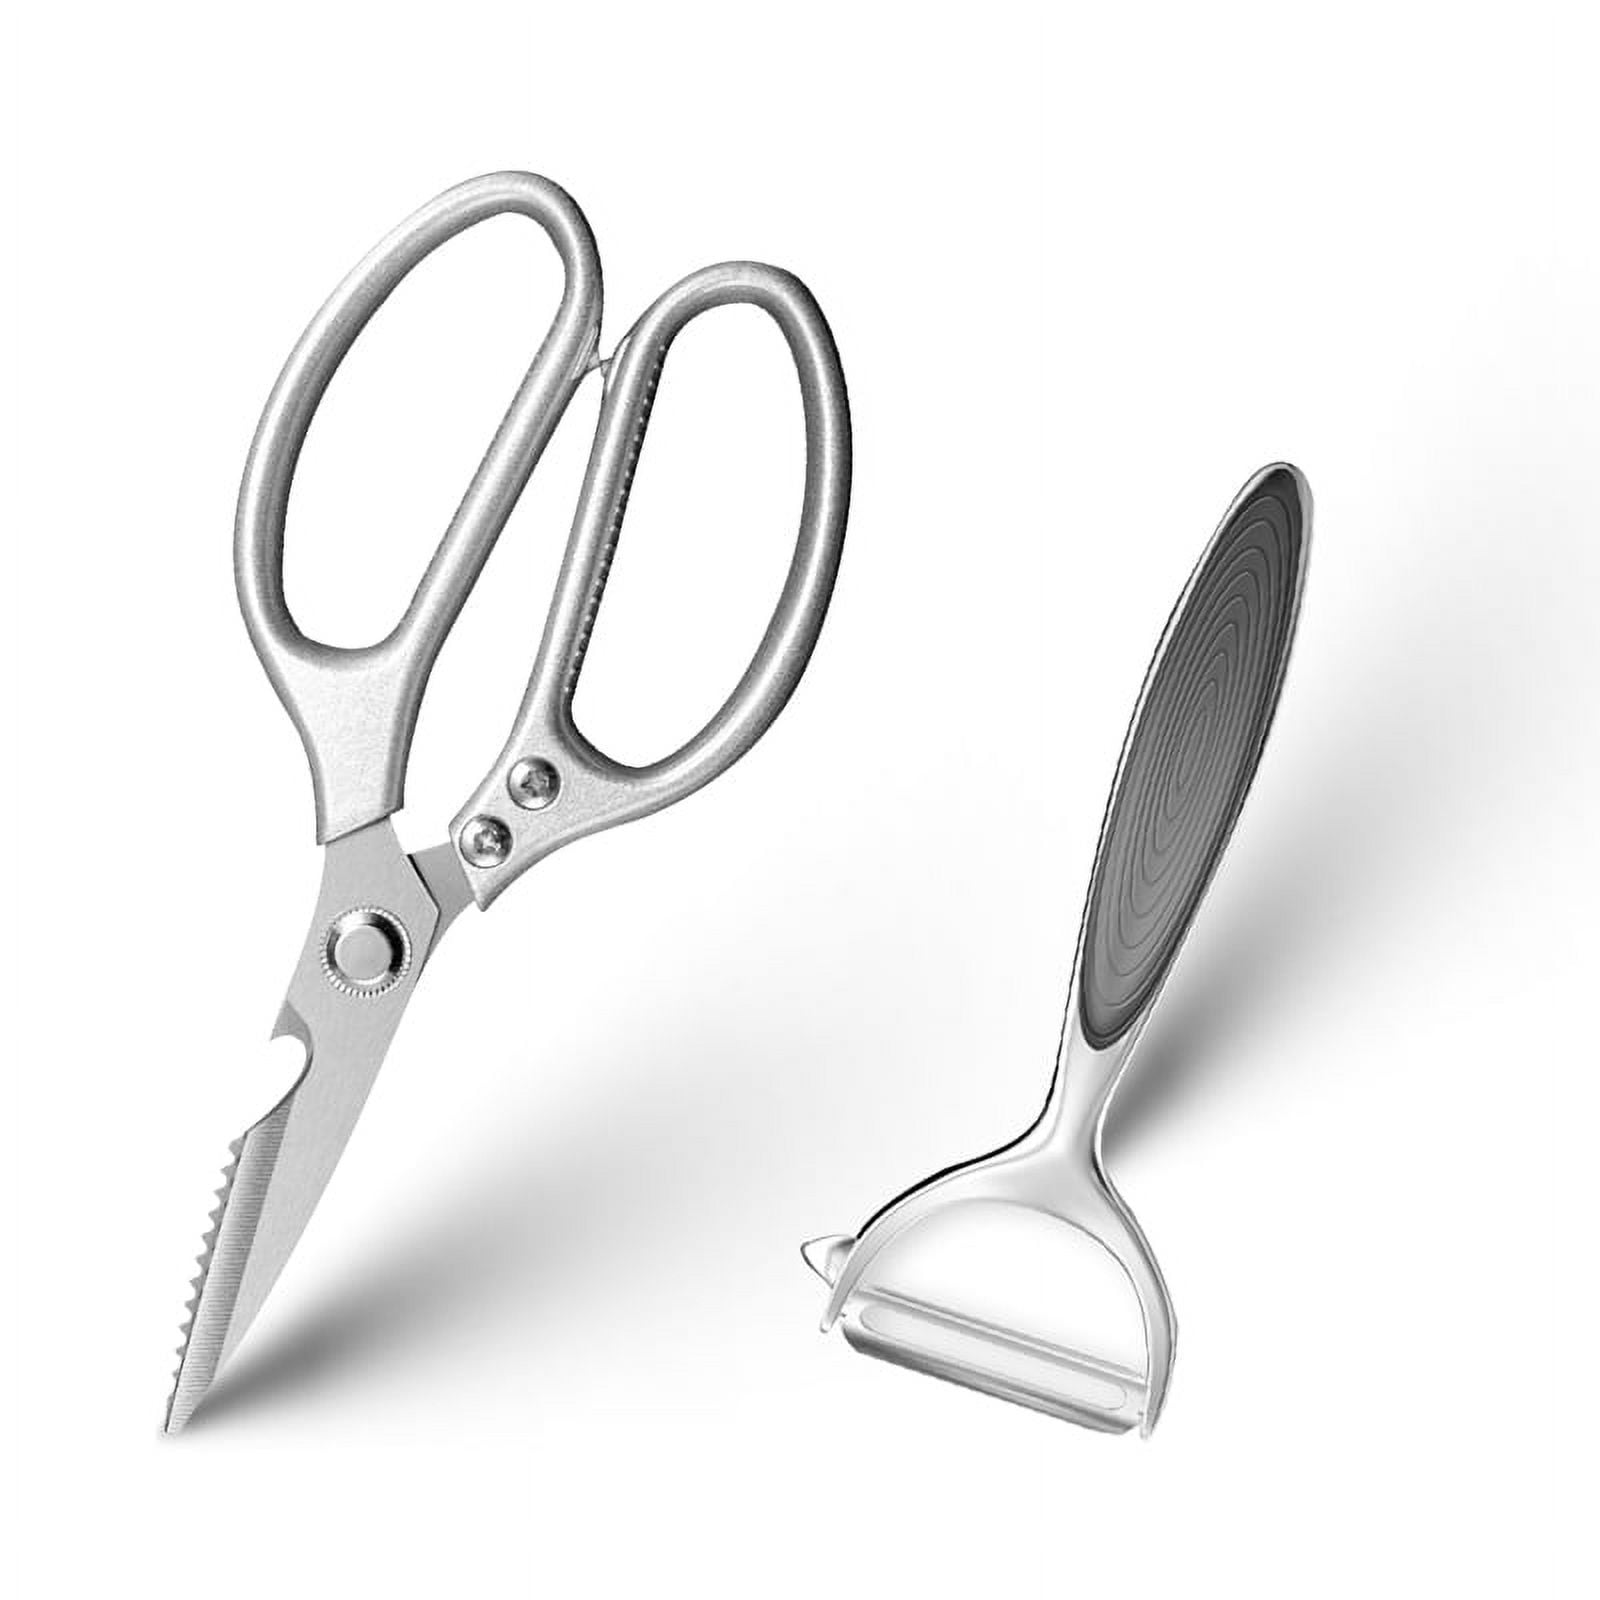 Tpotato kitchen scissors,kitchen shears heavy duty dishwasher  safe,Stainless Steel Sharp utility food cooking Scissors multipurpose with  cover cutting